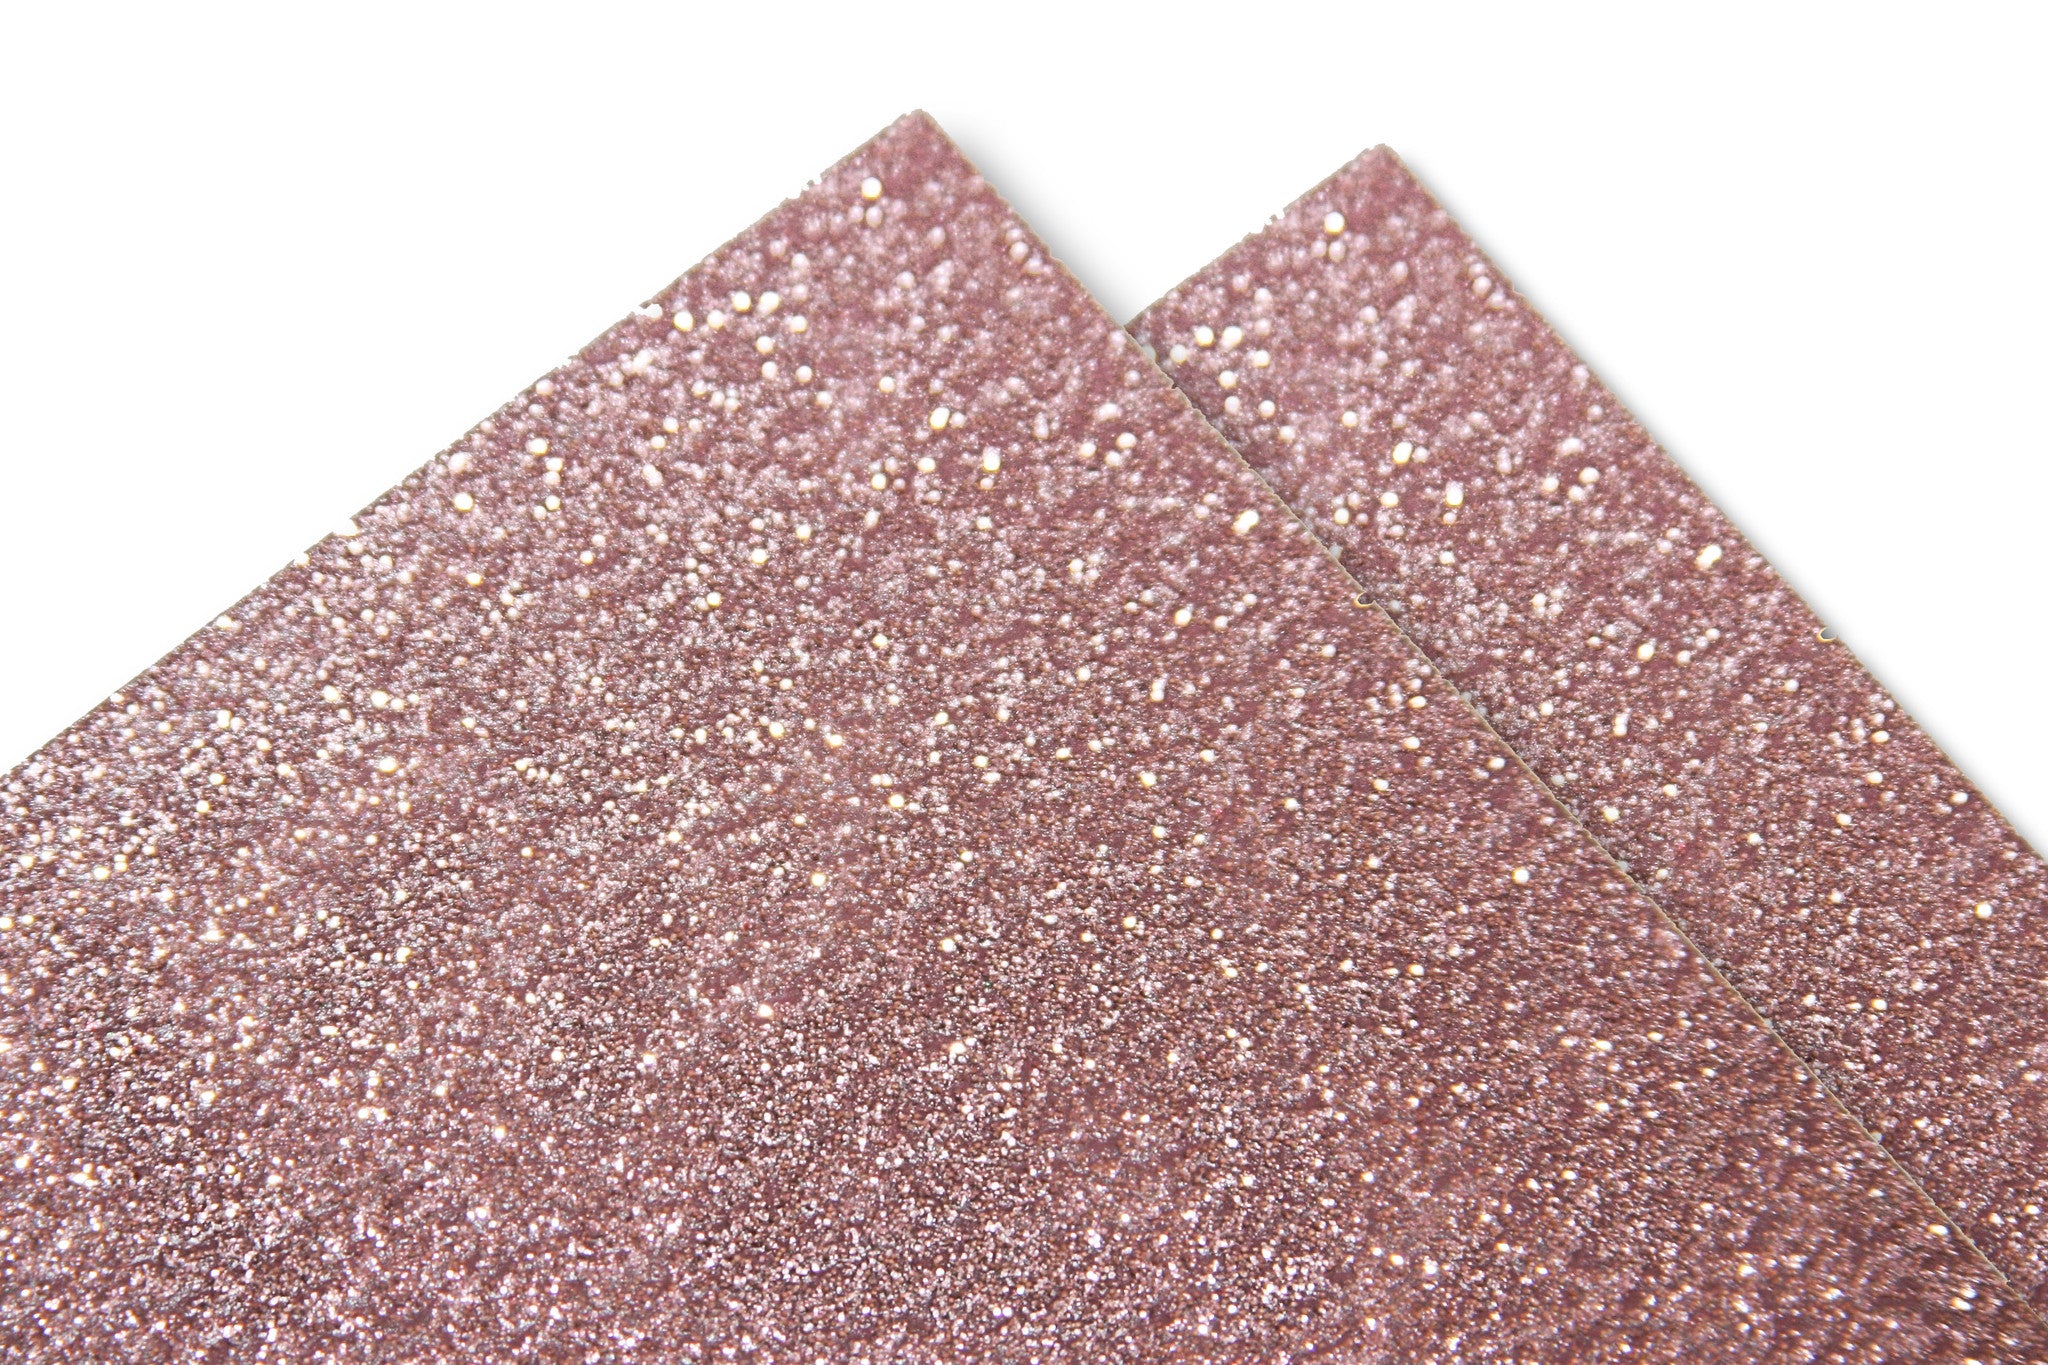 Best Creation Solid Glitter Cardstock - Hot Pink (not really hot pink…  coral pink with gold)